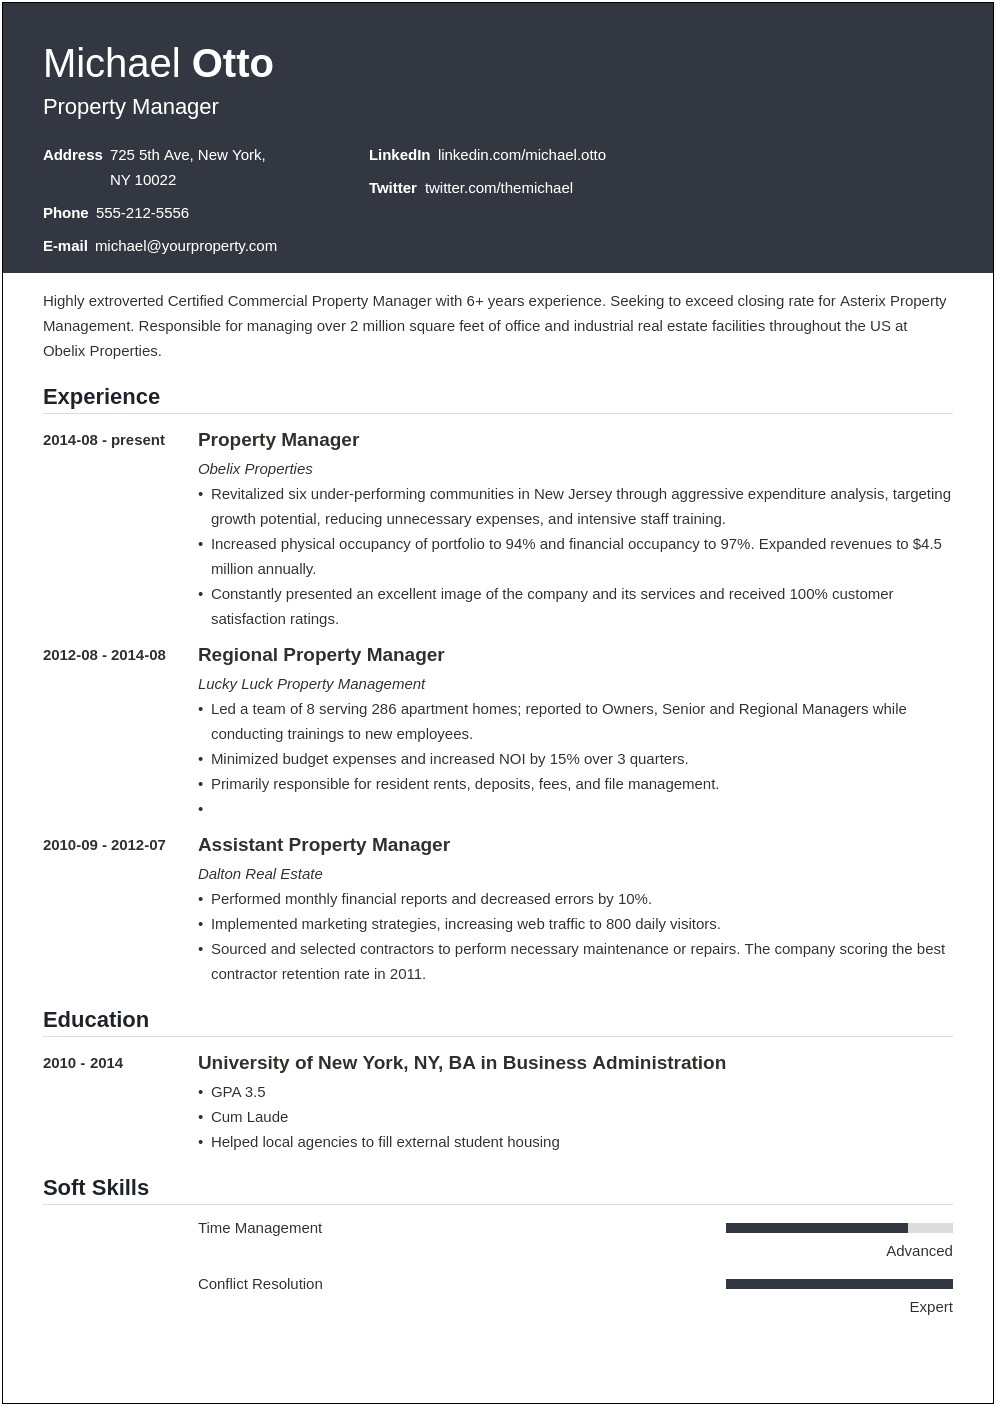 Resume Language For Property Manager